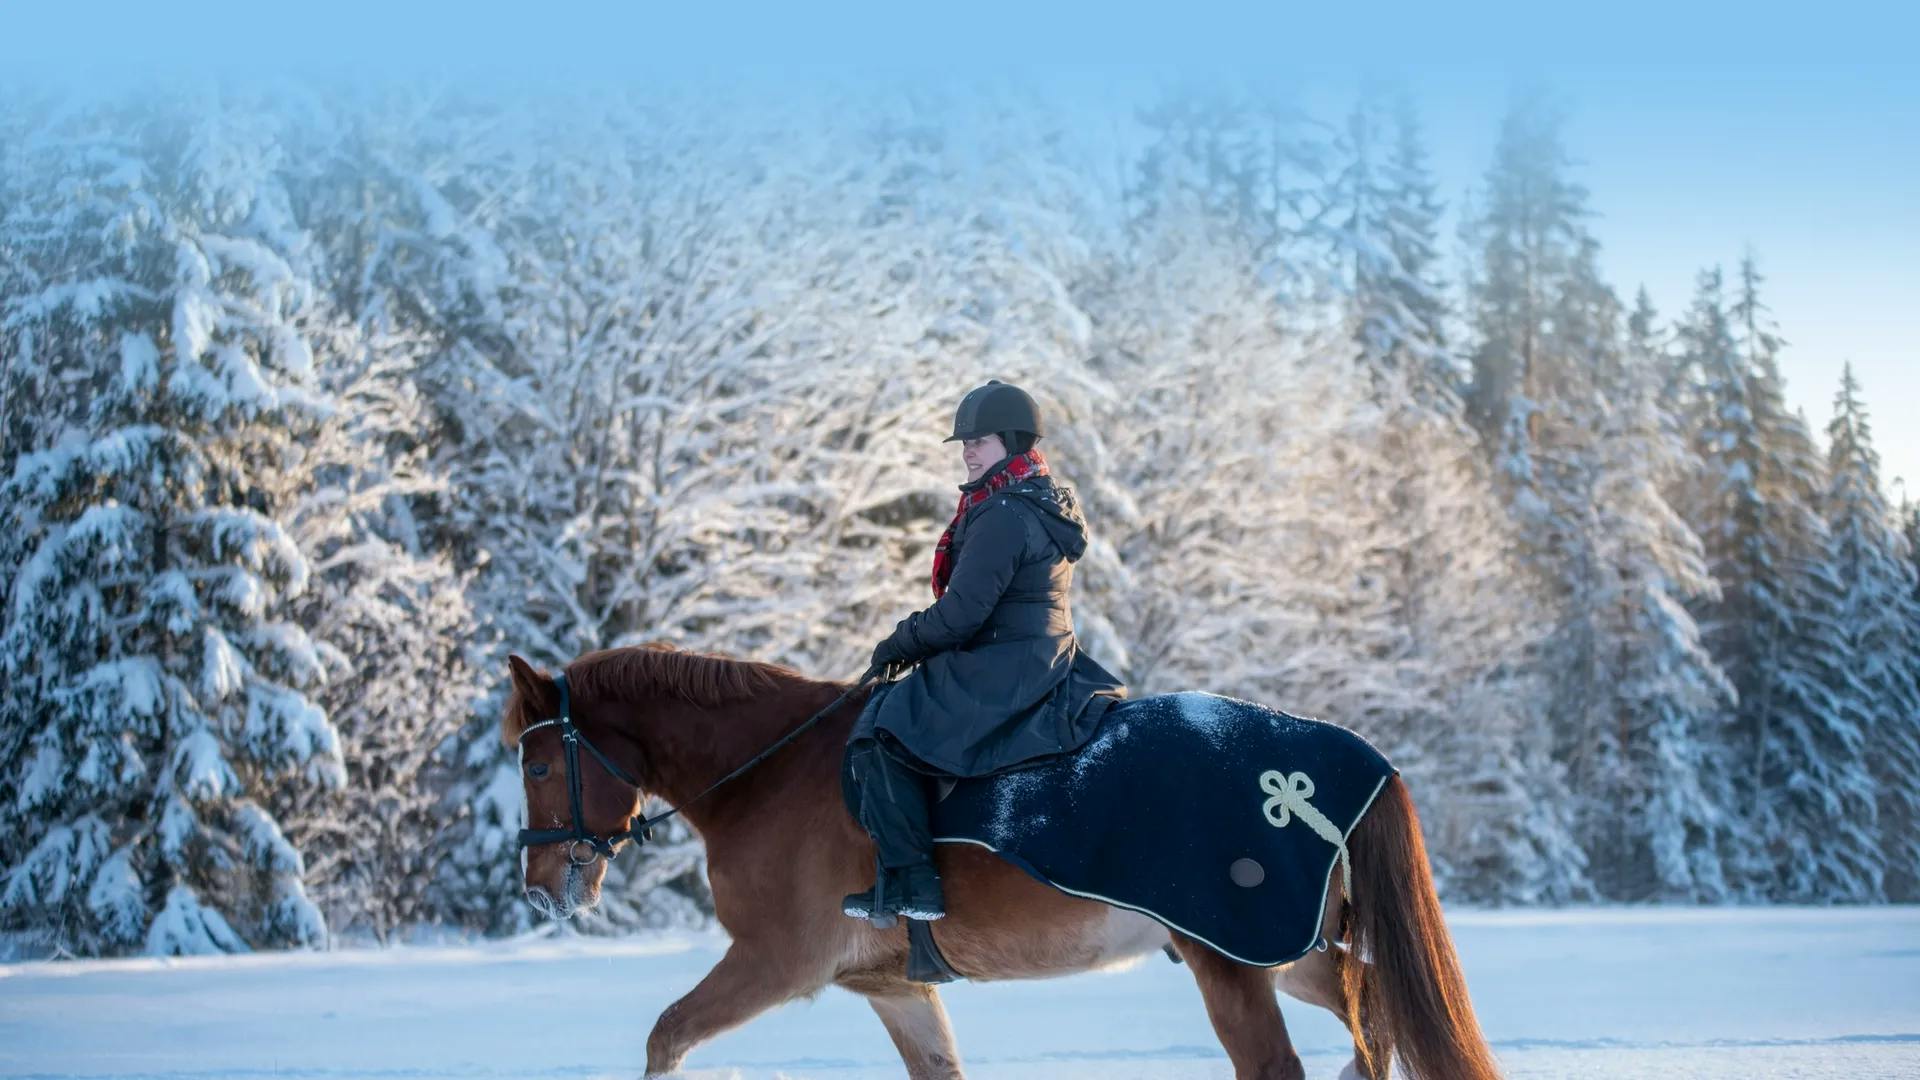 A horse and rider walking through deep snow with a quarter sheet on and trees in background